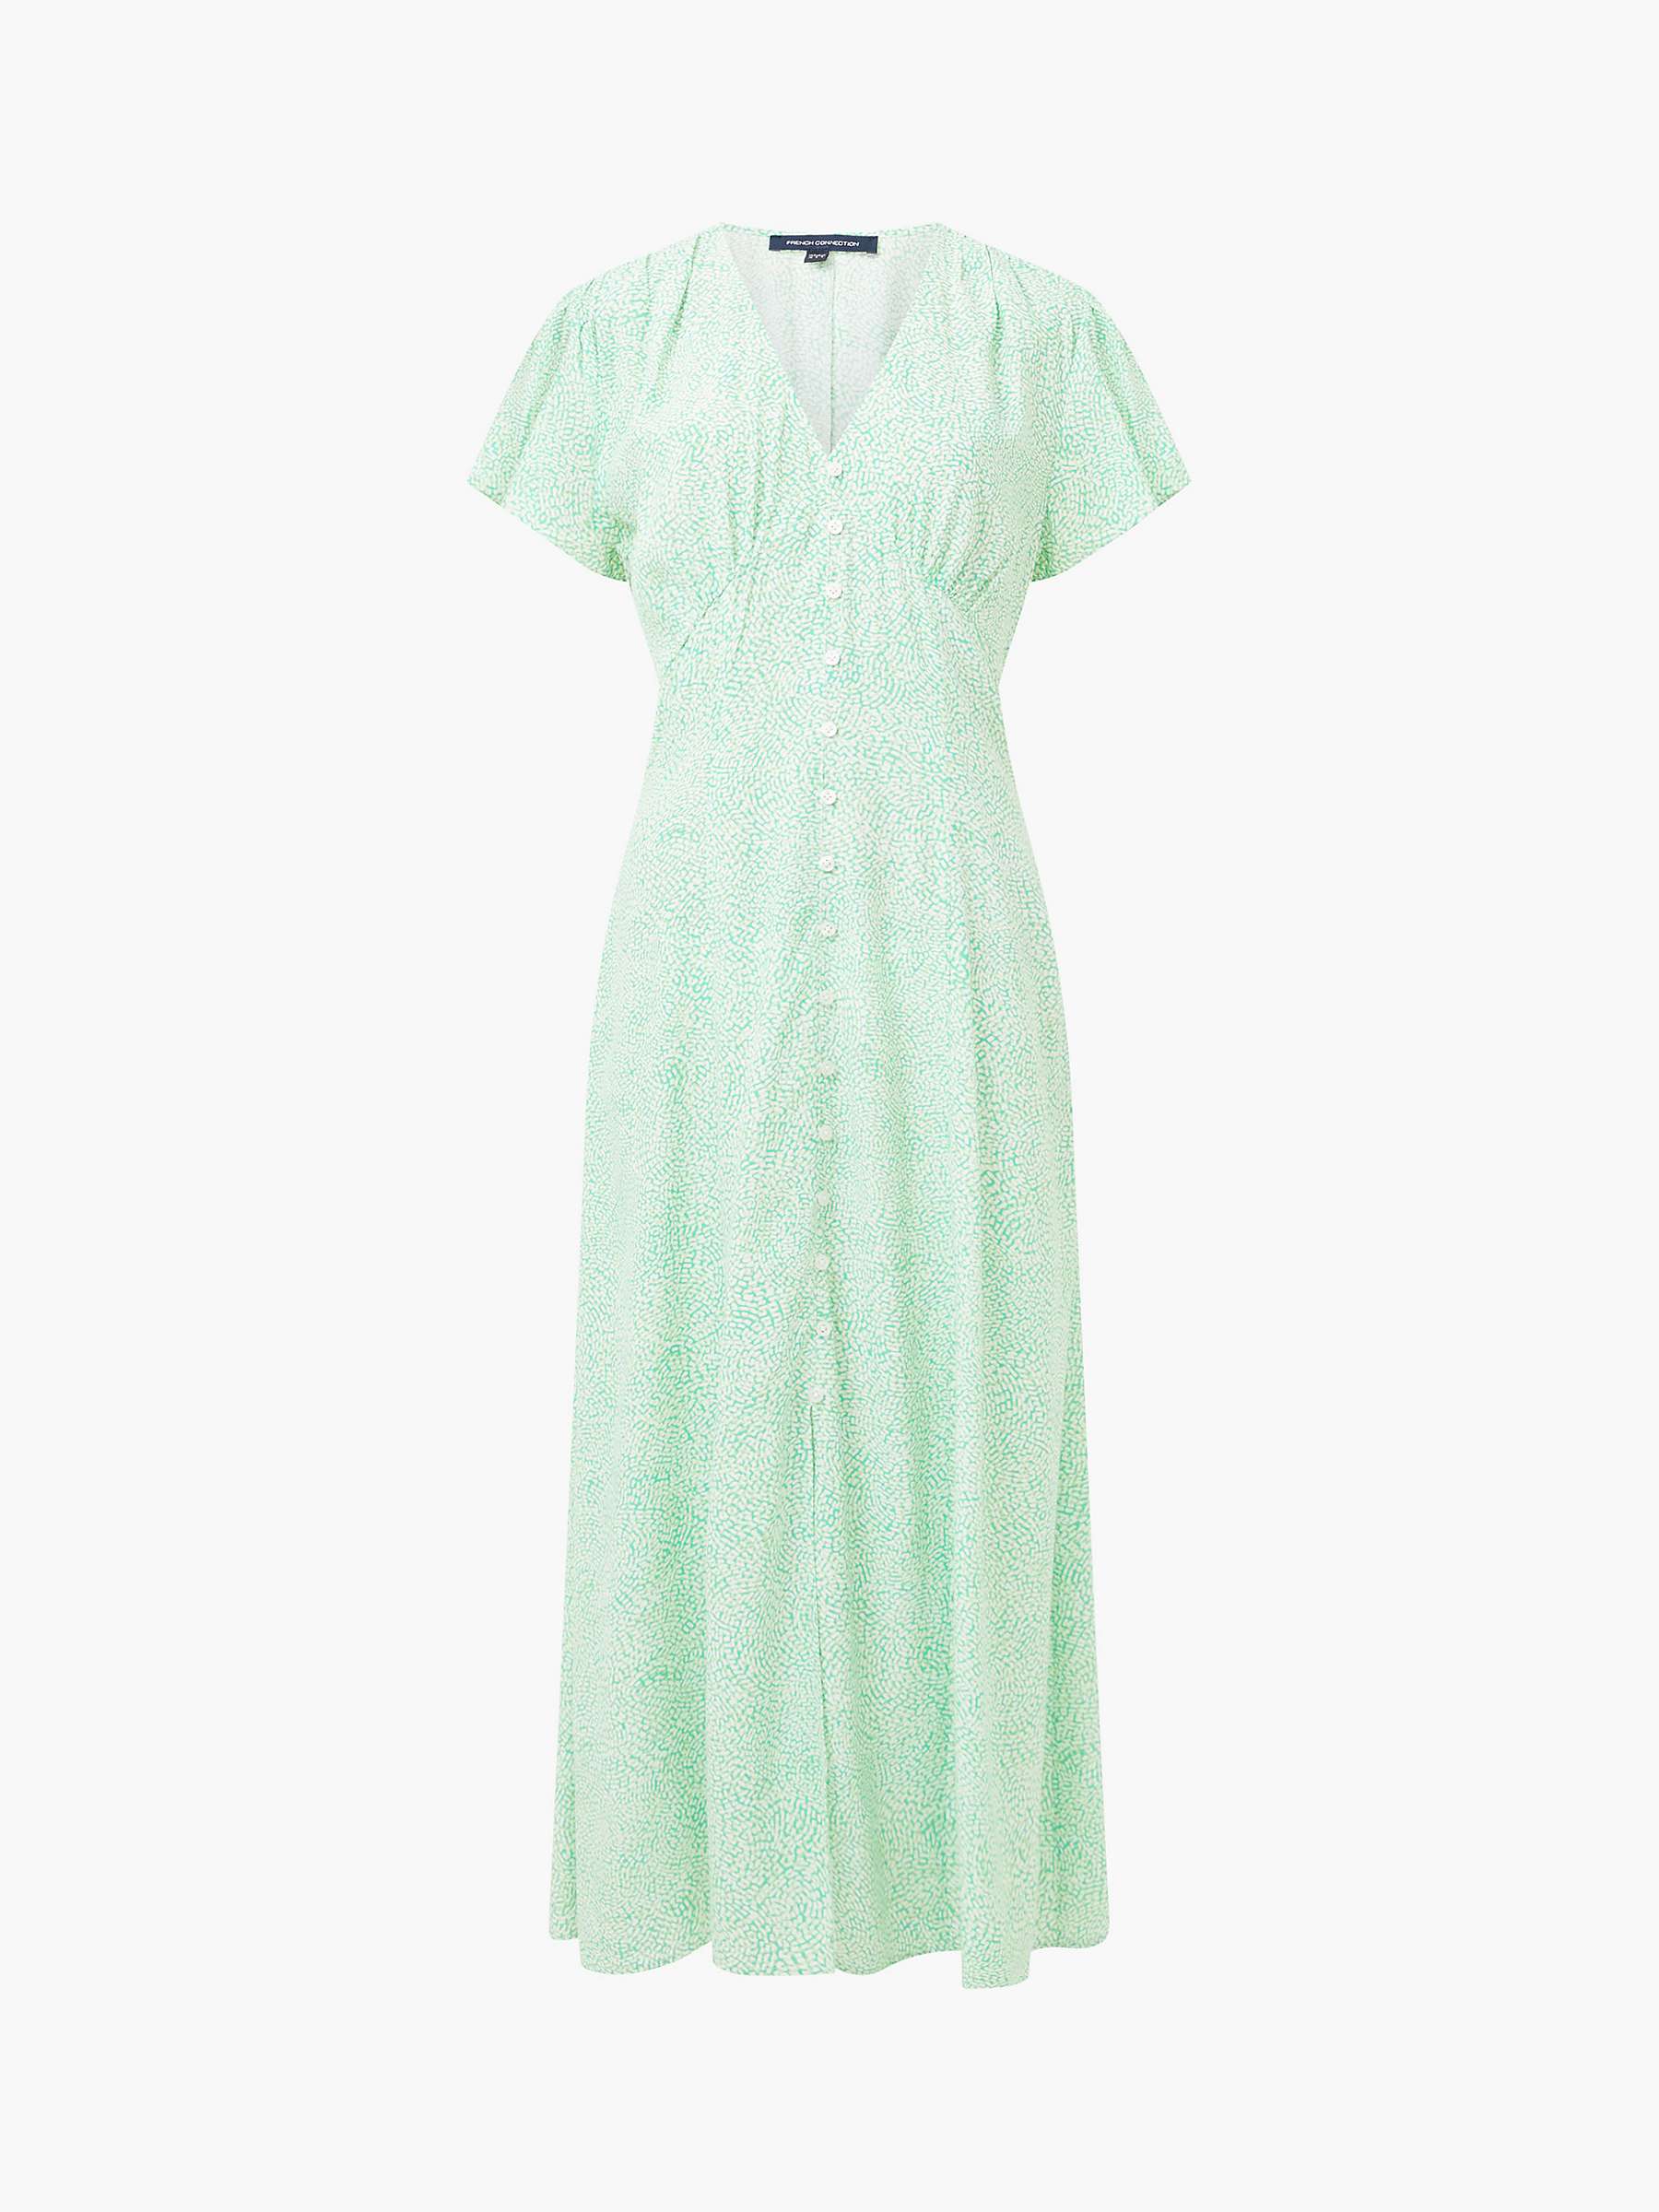 Buy French Connection Bernice Tea Midi Dress, Minted Green Online at johnlewis.com